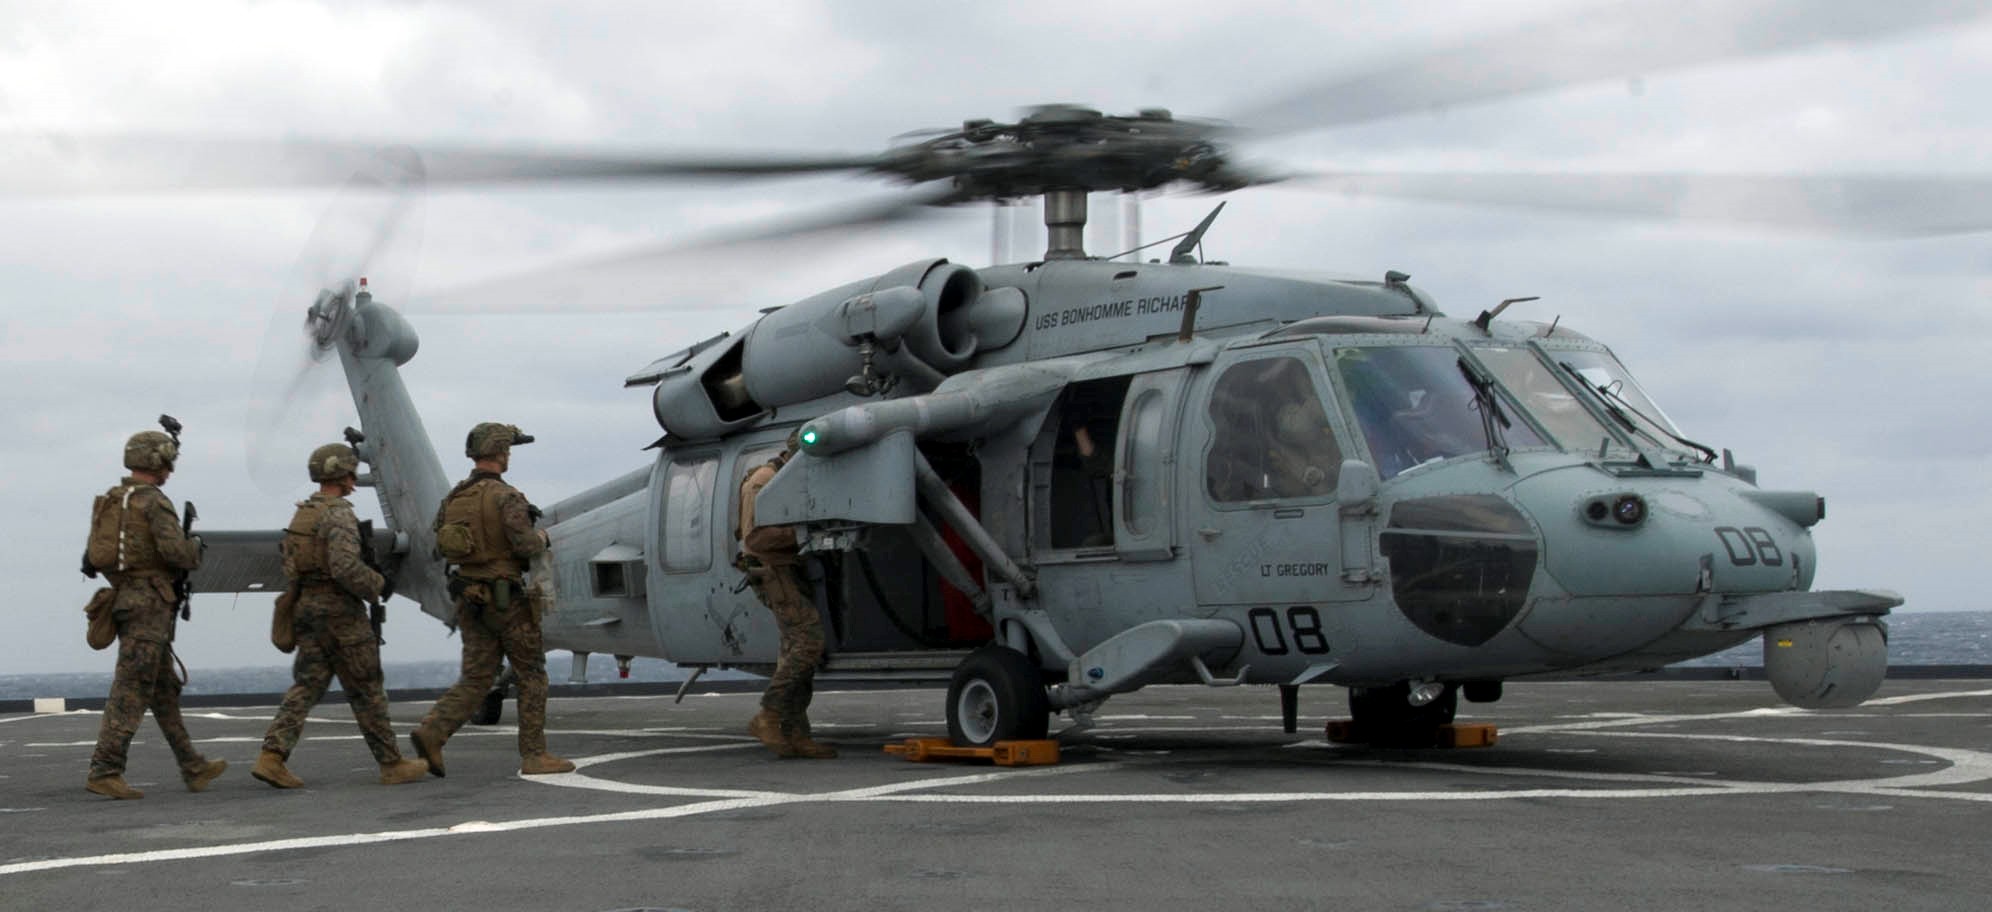 hsc-25 island knights mh-60s seahawk us navy